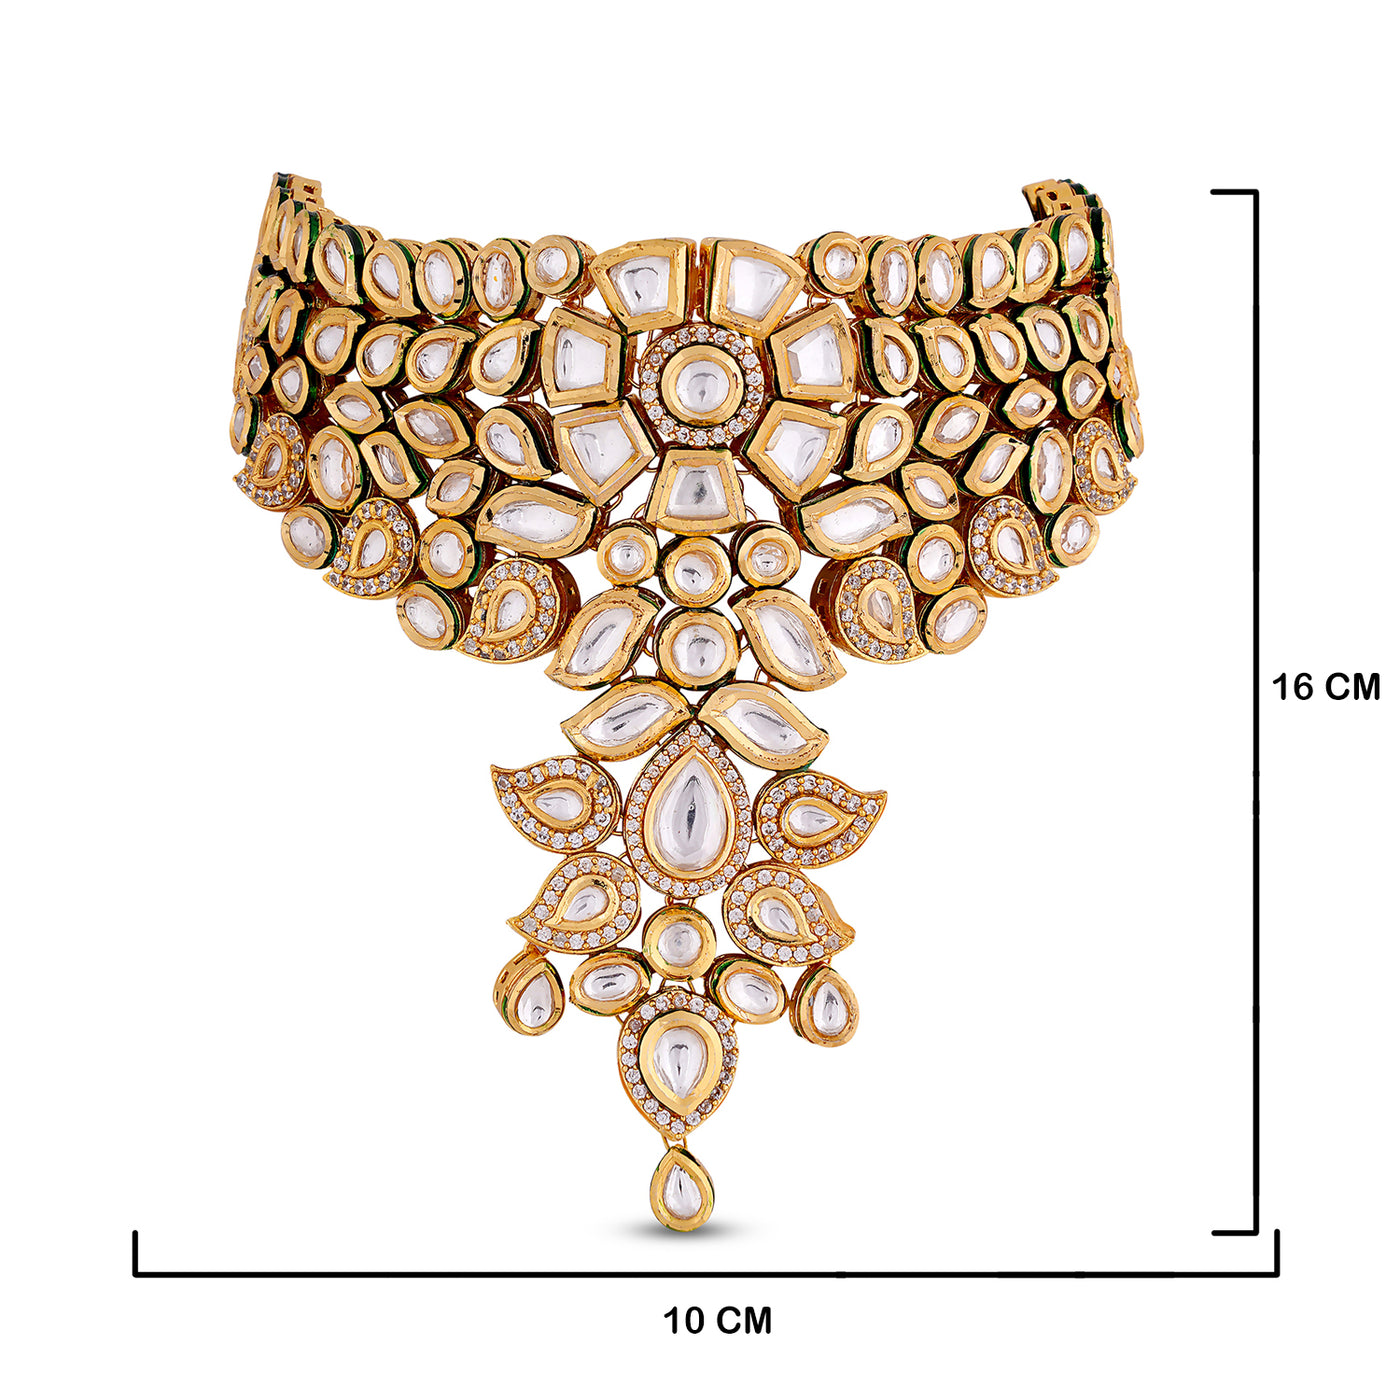 Classic Kundan Studded Choker with measurements in cm. 16cm by 10cm.